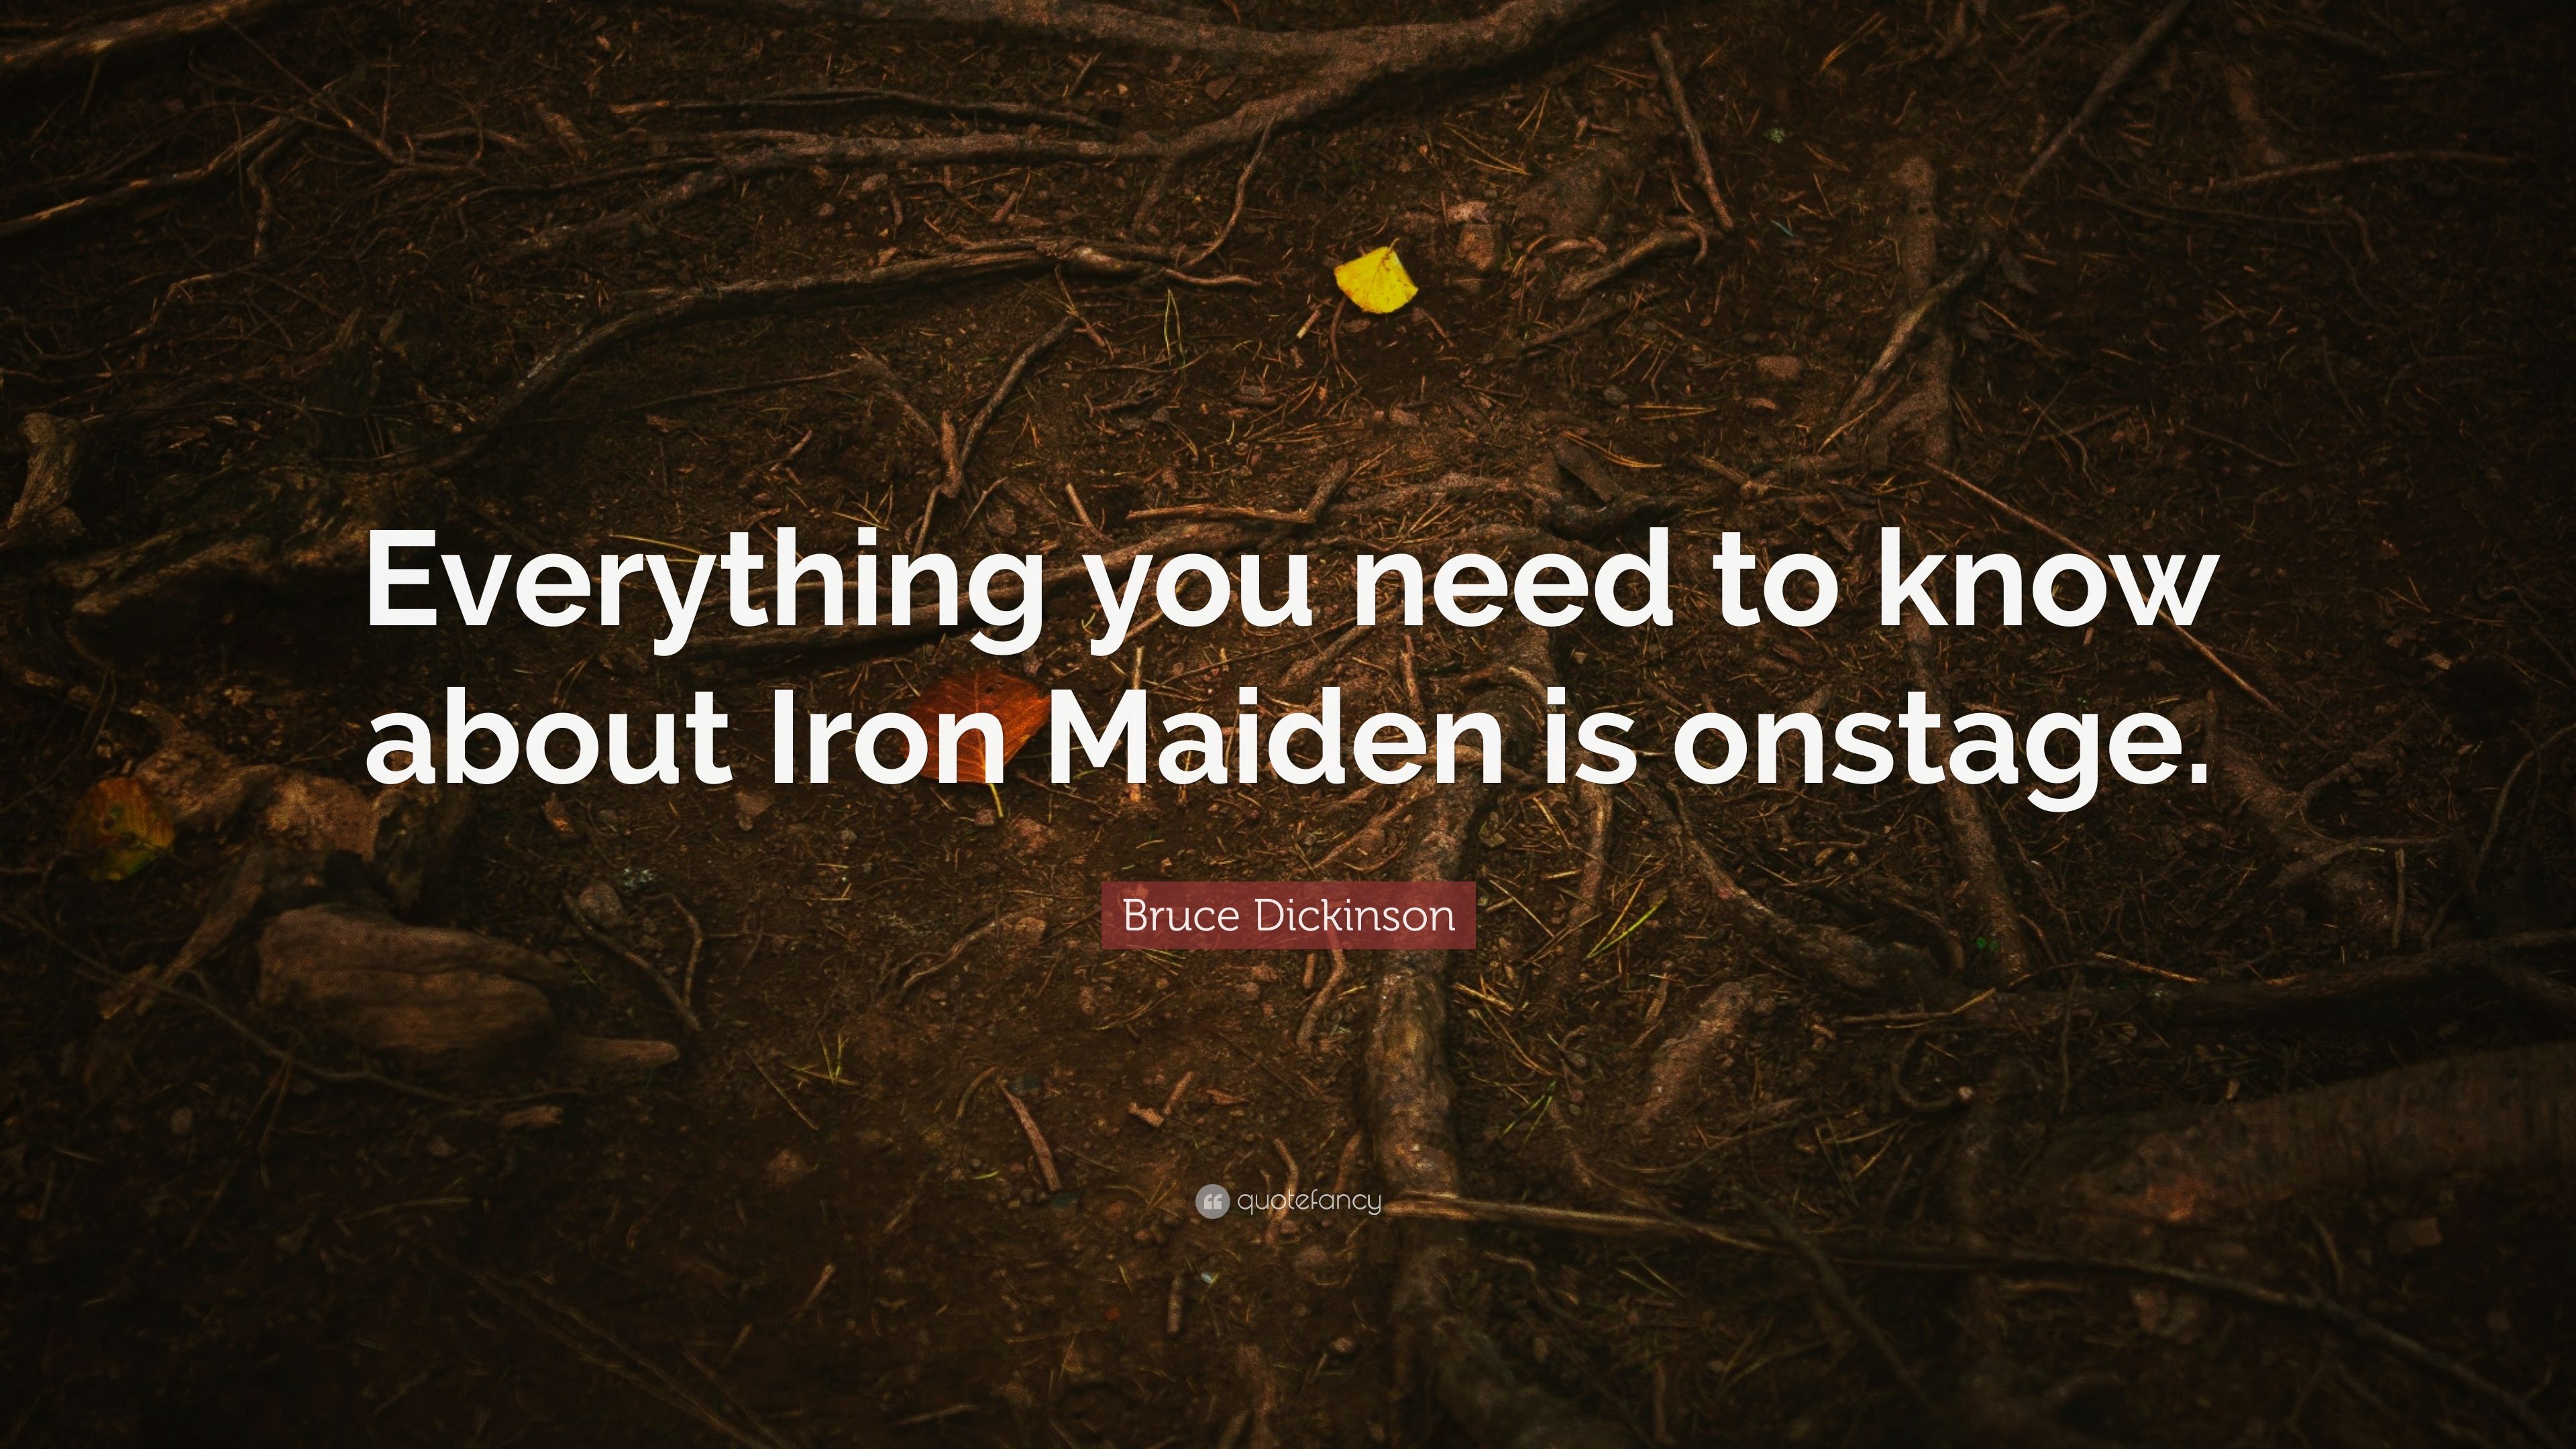 5 Quotes About Iron Maiden